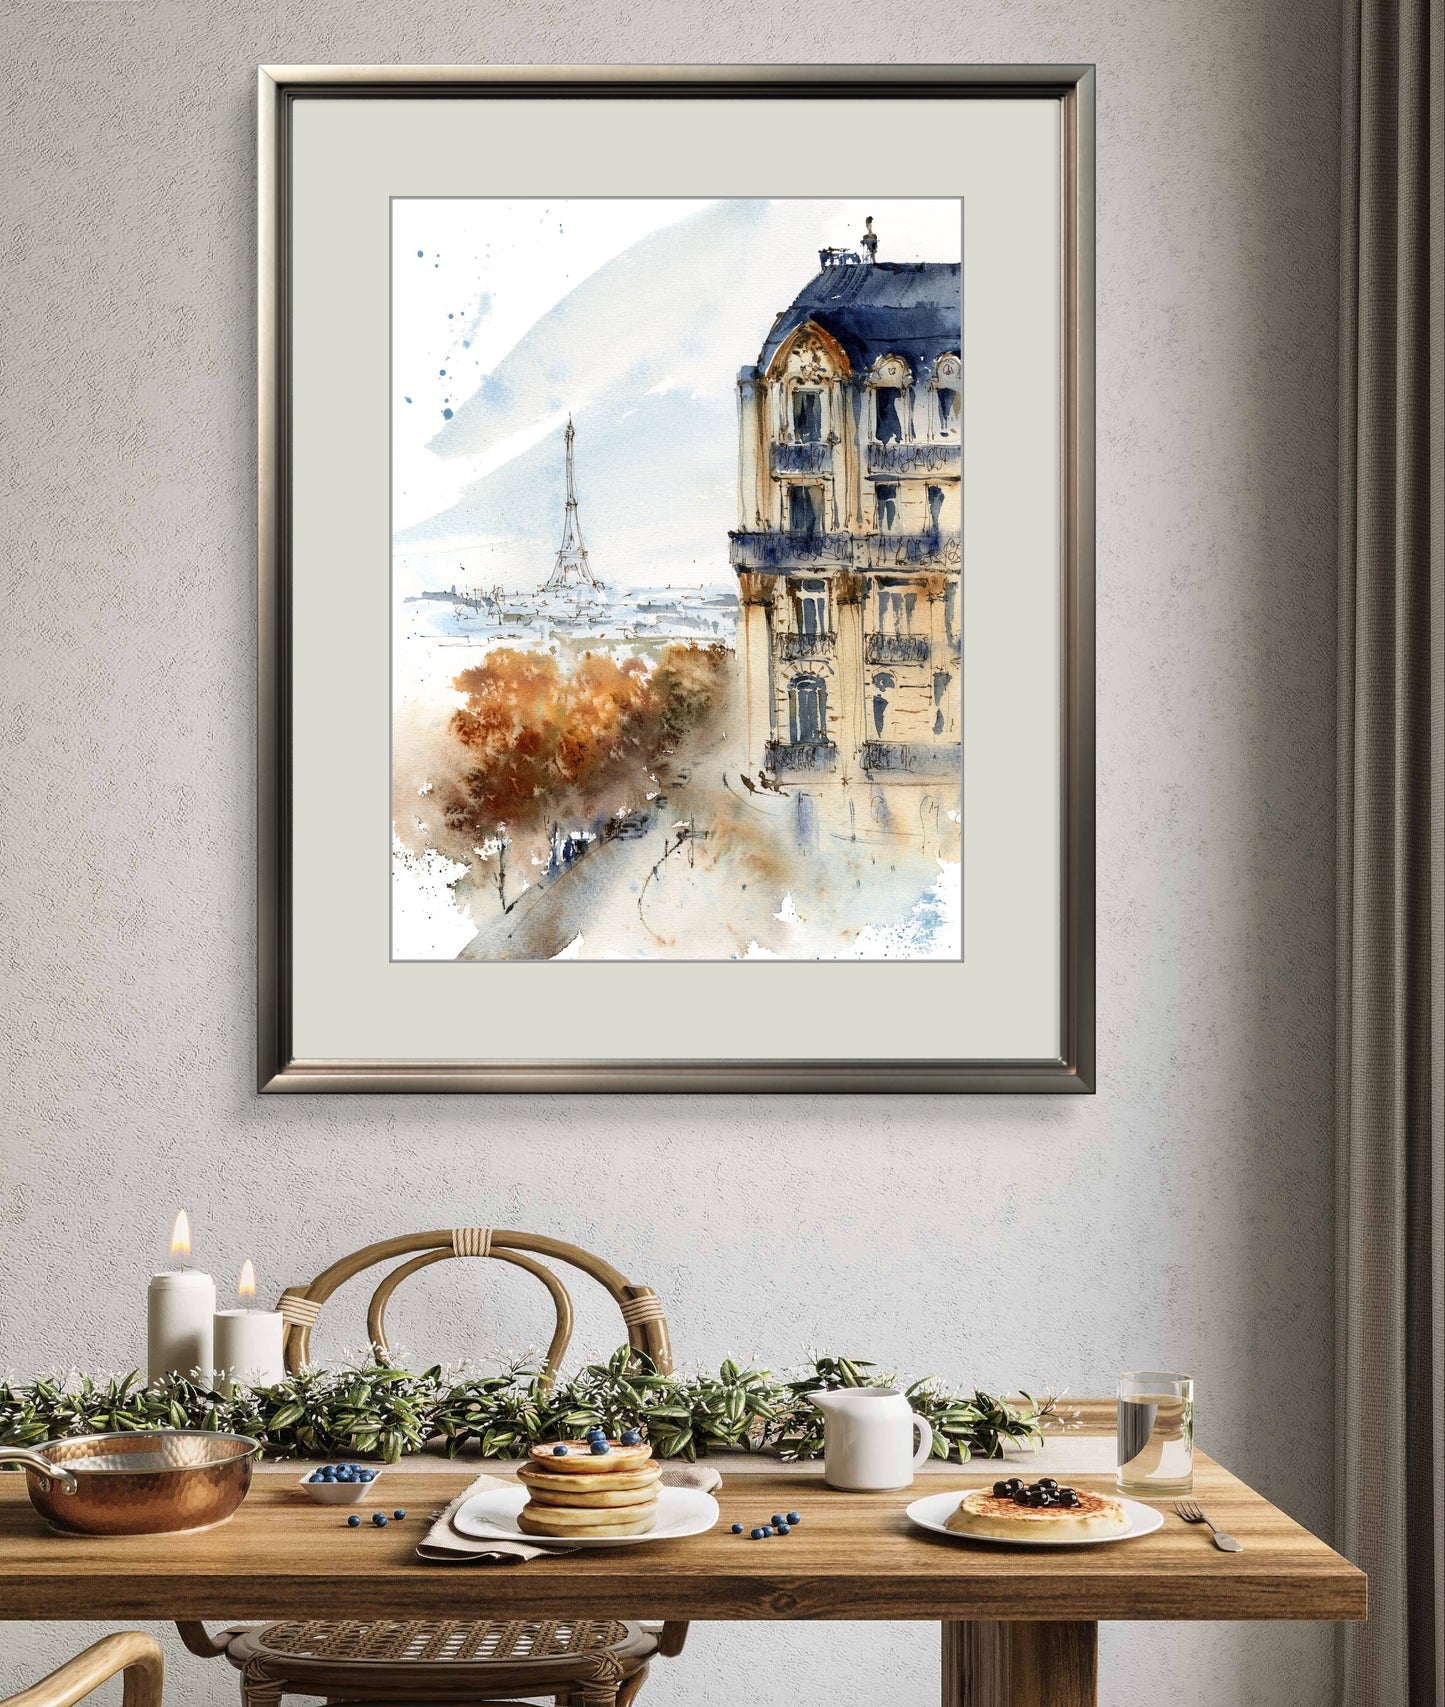 Eiffel Tower Art, Watercolor Paris Street View in Fall, Artistic Home Decoration, Unique Wedding Gift